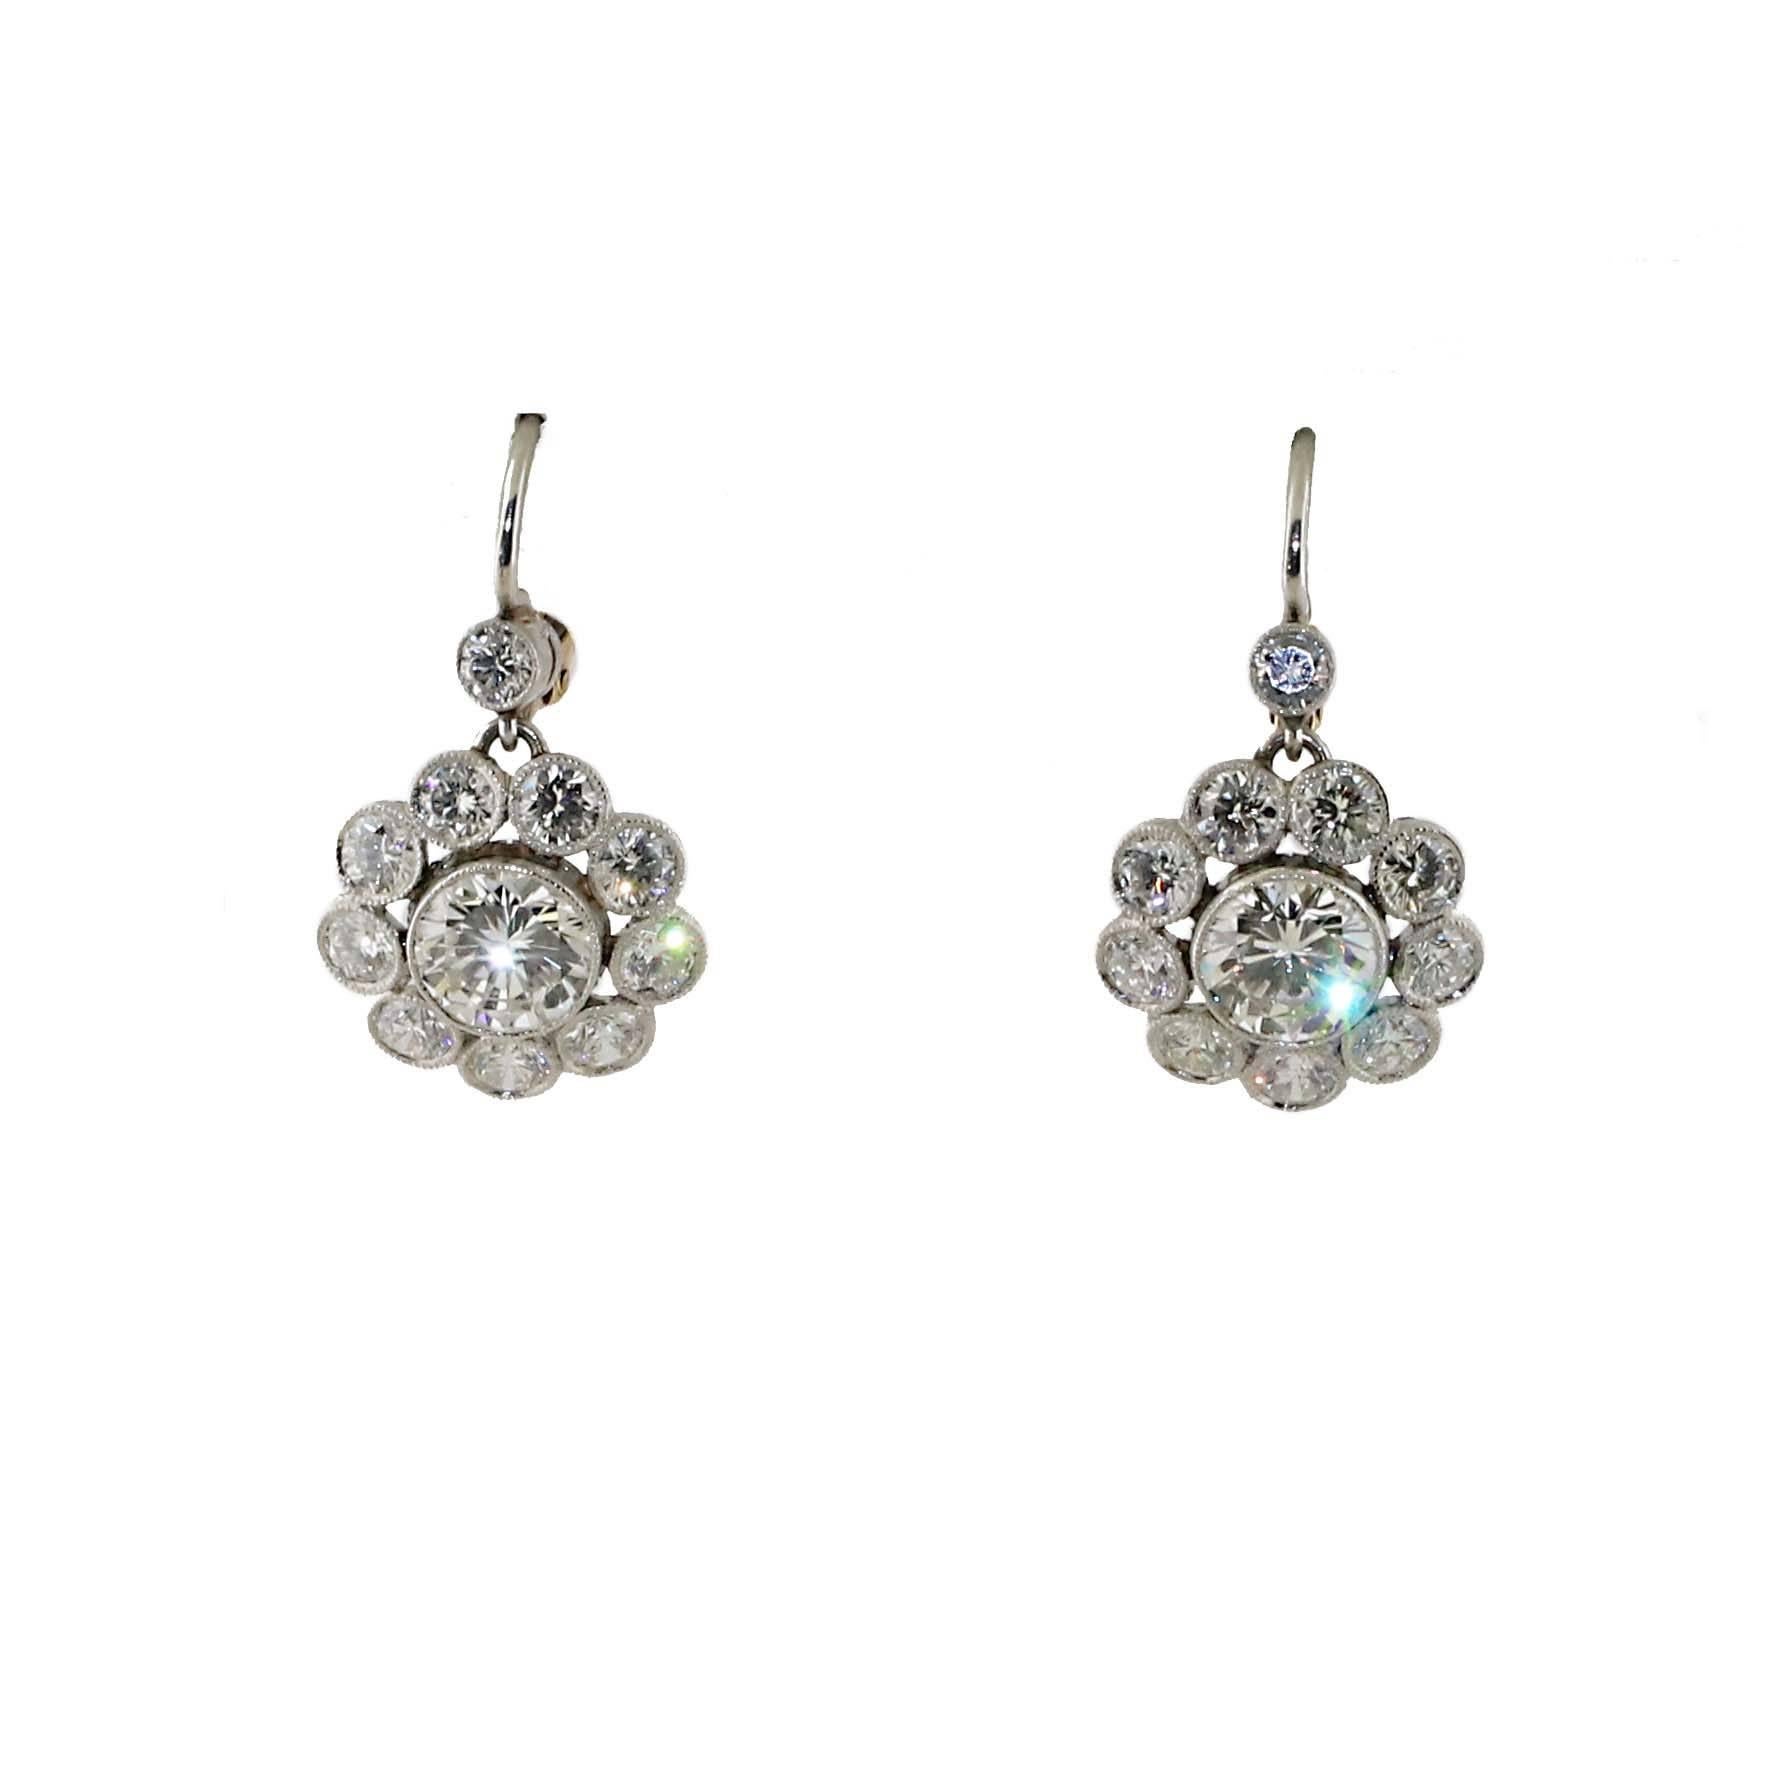 Get the deco look without paying the high price for an antique pair of earrings. This exceptional pair of diamond earrings has almost 5 carats of white diamonds set in both 18kt yellow and white gold. 

Each center stone is over 1 carat in size